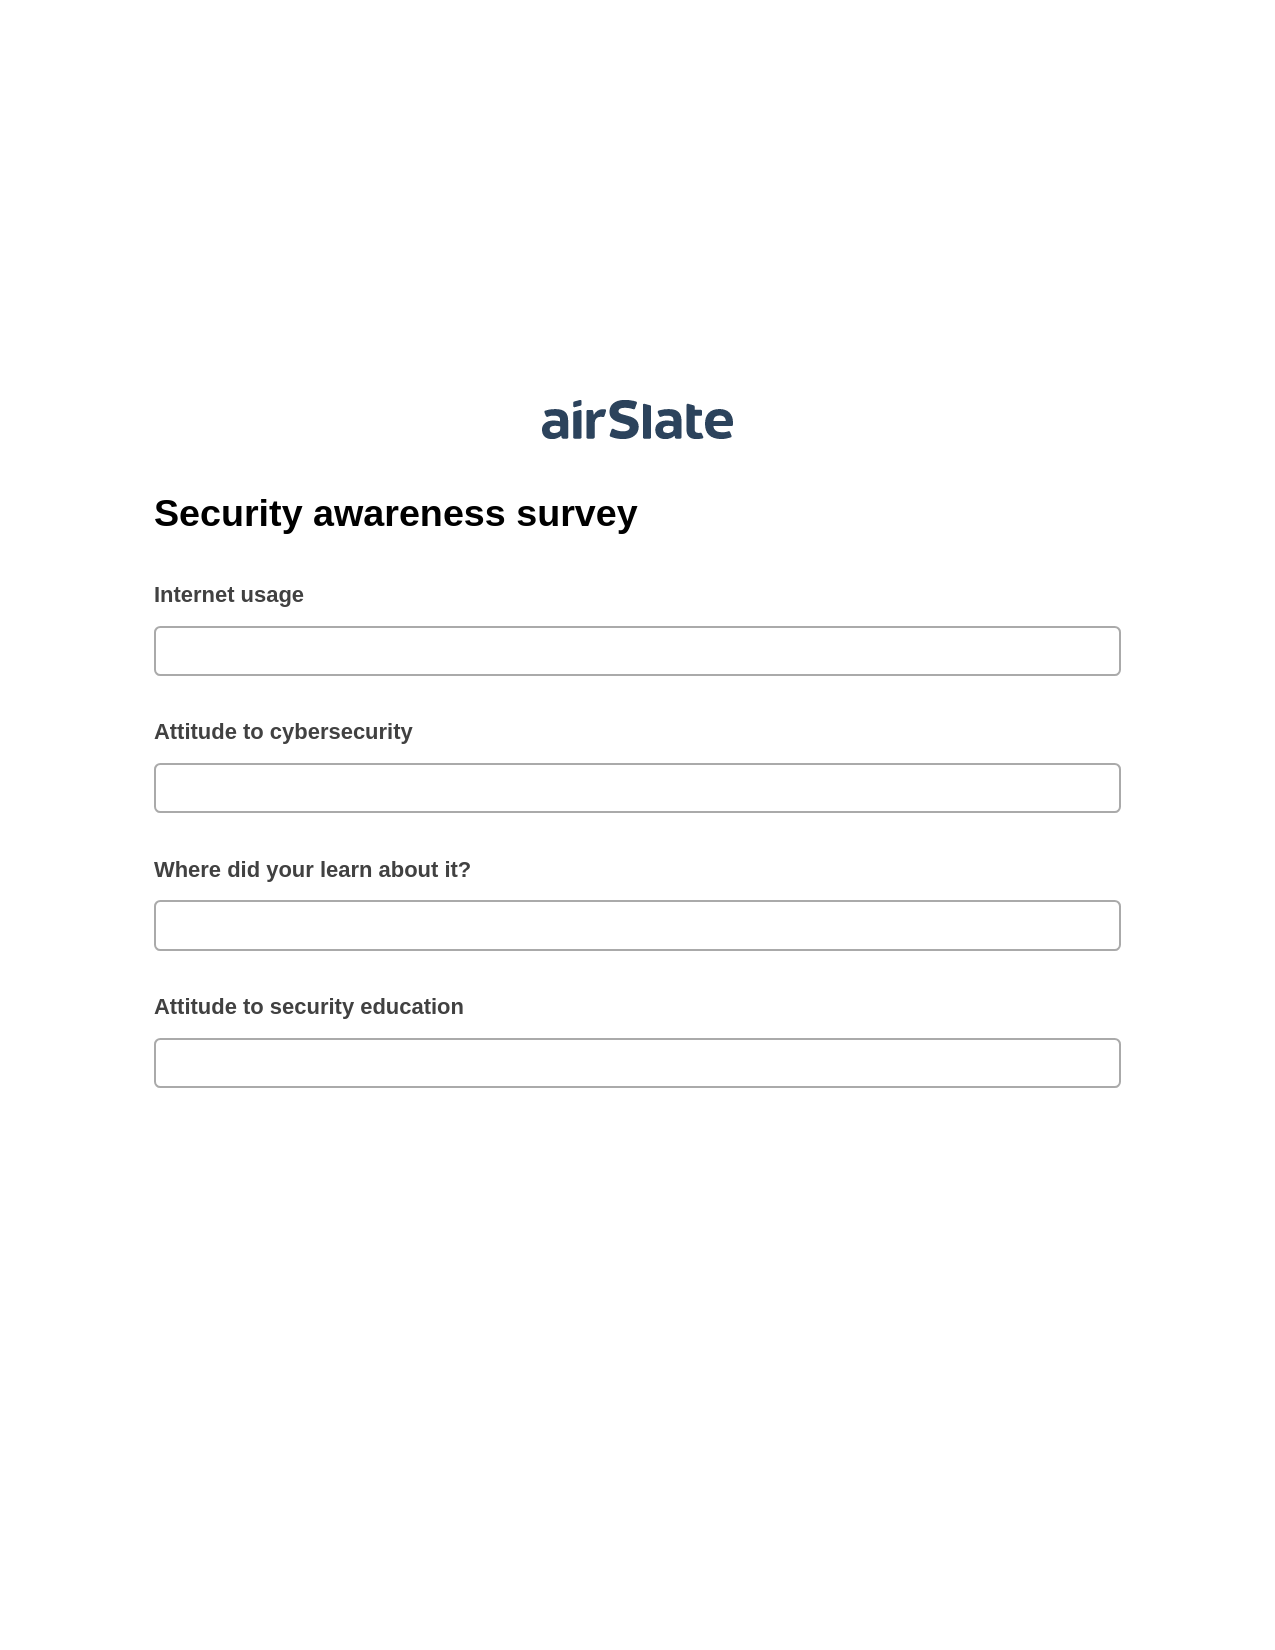 Security awareness survey Pre-fill from Excel Spreadsheet Bot, Mailchimp add recipient to audience Bot, Archive to SharePoint Folder Bot